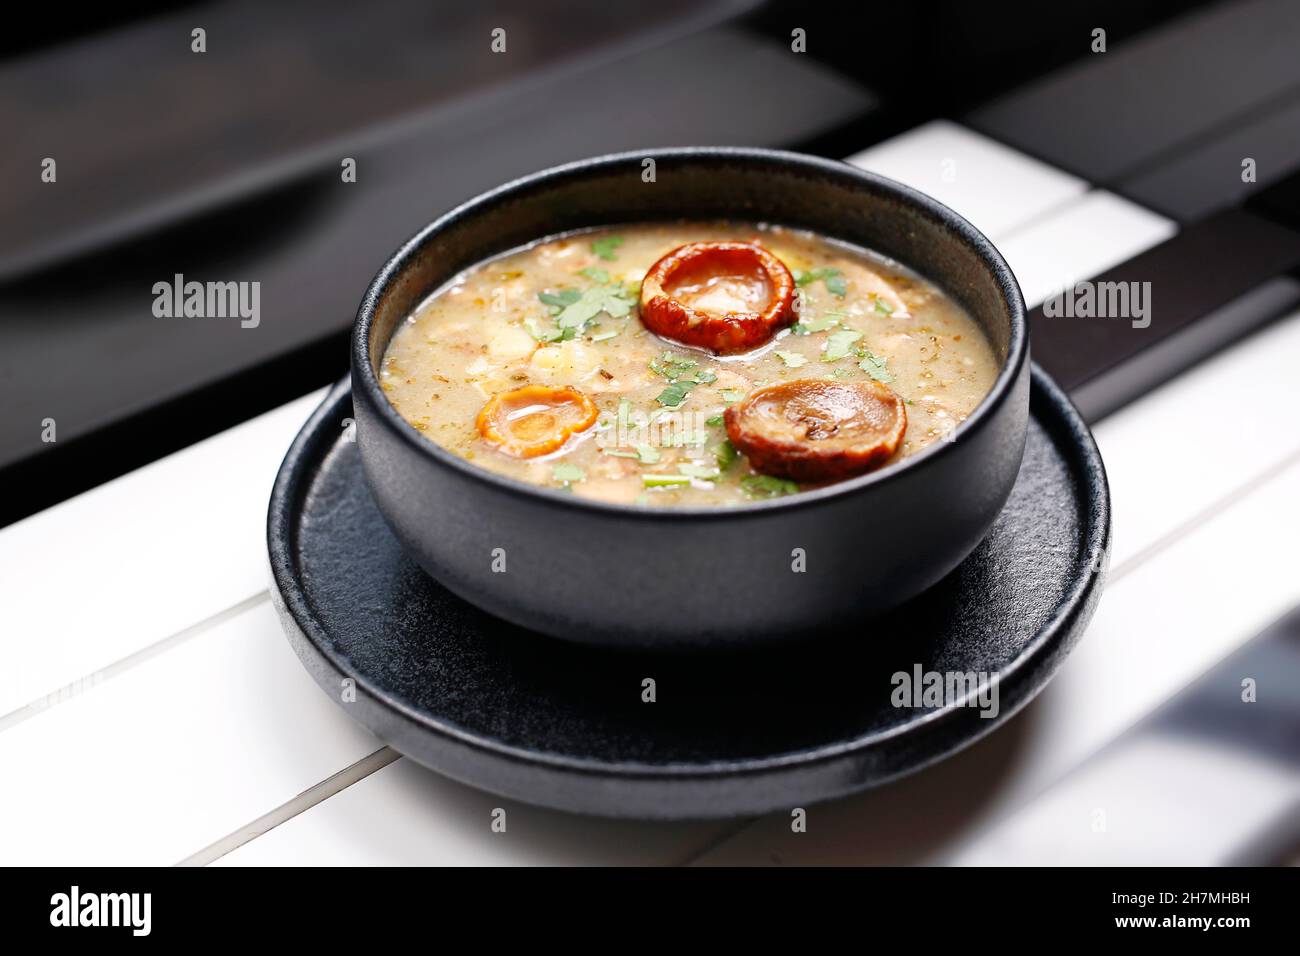 Mushroom soup. A tasty dish.Culinary photography. Suggestion to serve the dish. Takeaway, diet box. Appetizing ready-to-go dish served in a disposable Stock Photo